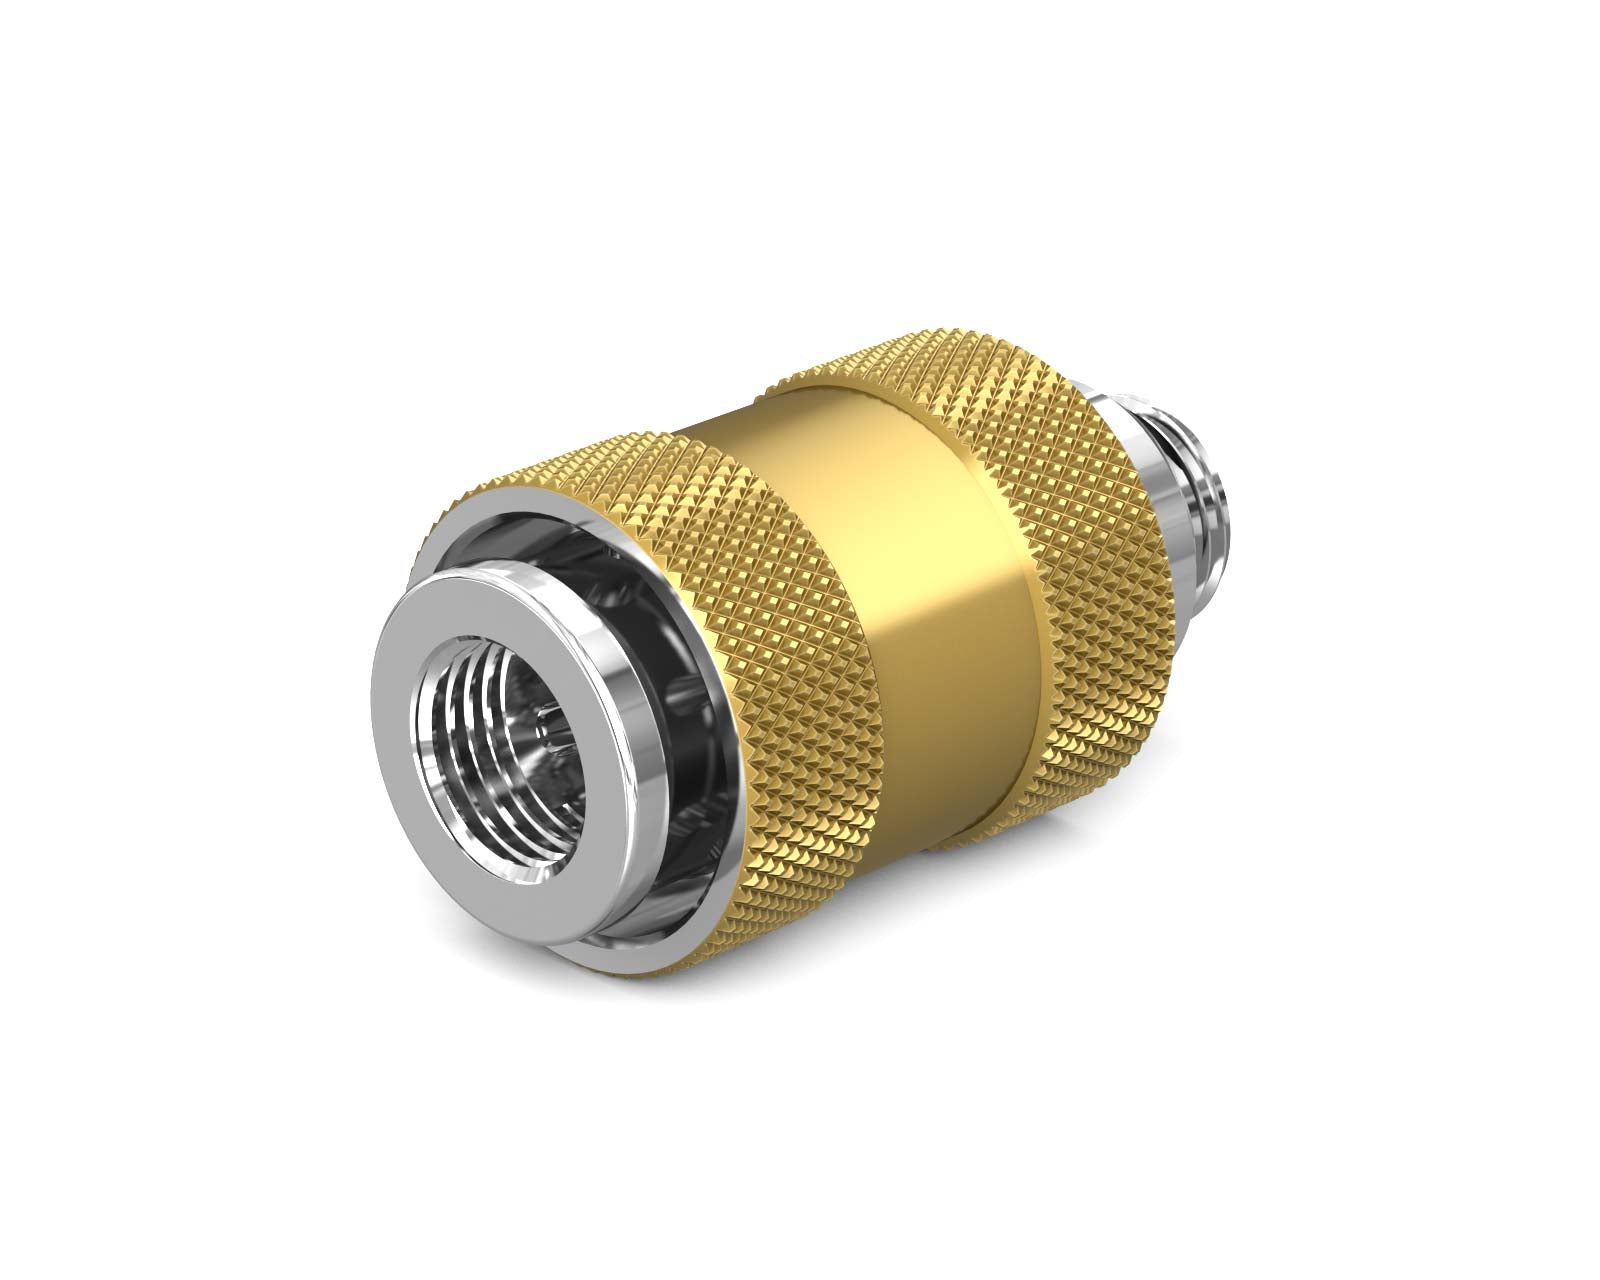 PrimoChill Male to Female G 1/4 SX Pull Drain Valve - PrimoChill - KEEPING IT COOL Candy Gold